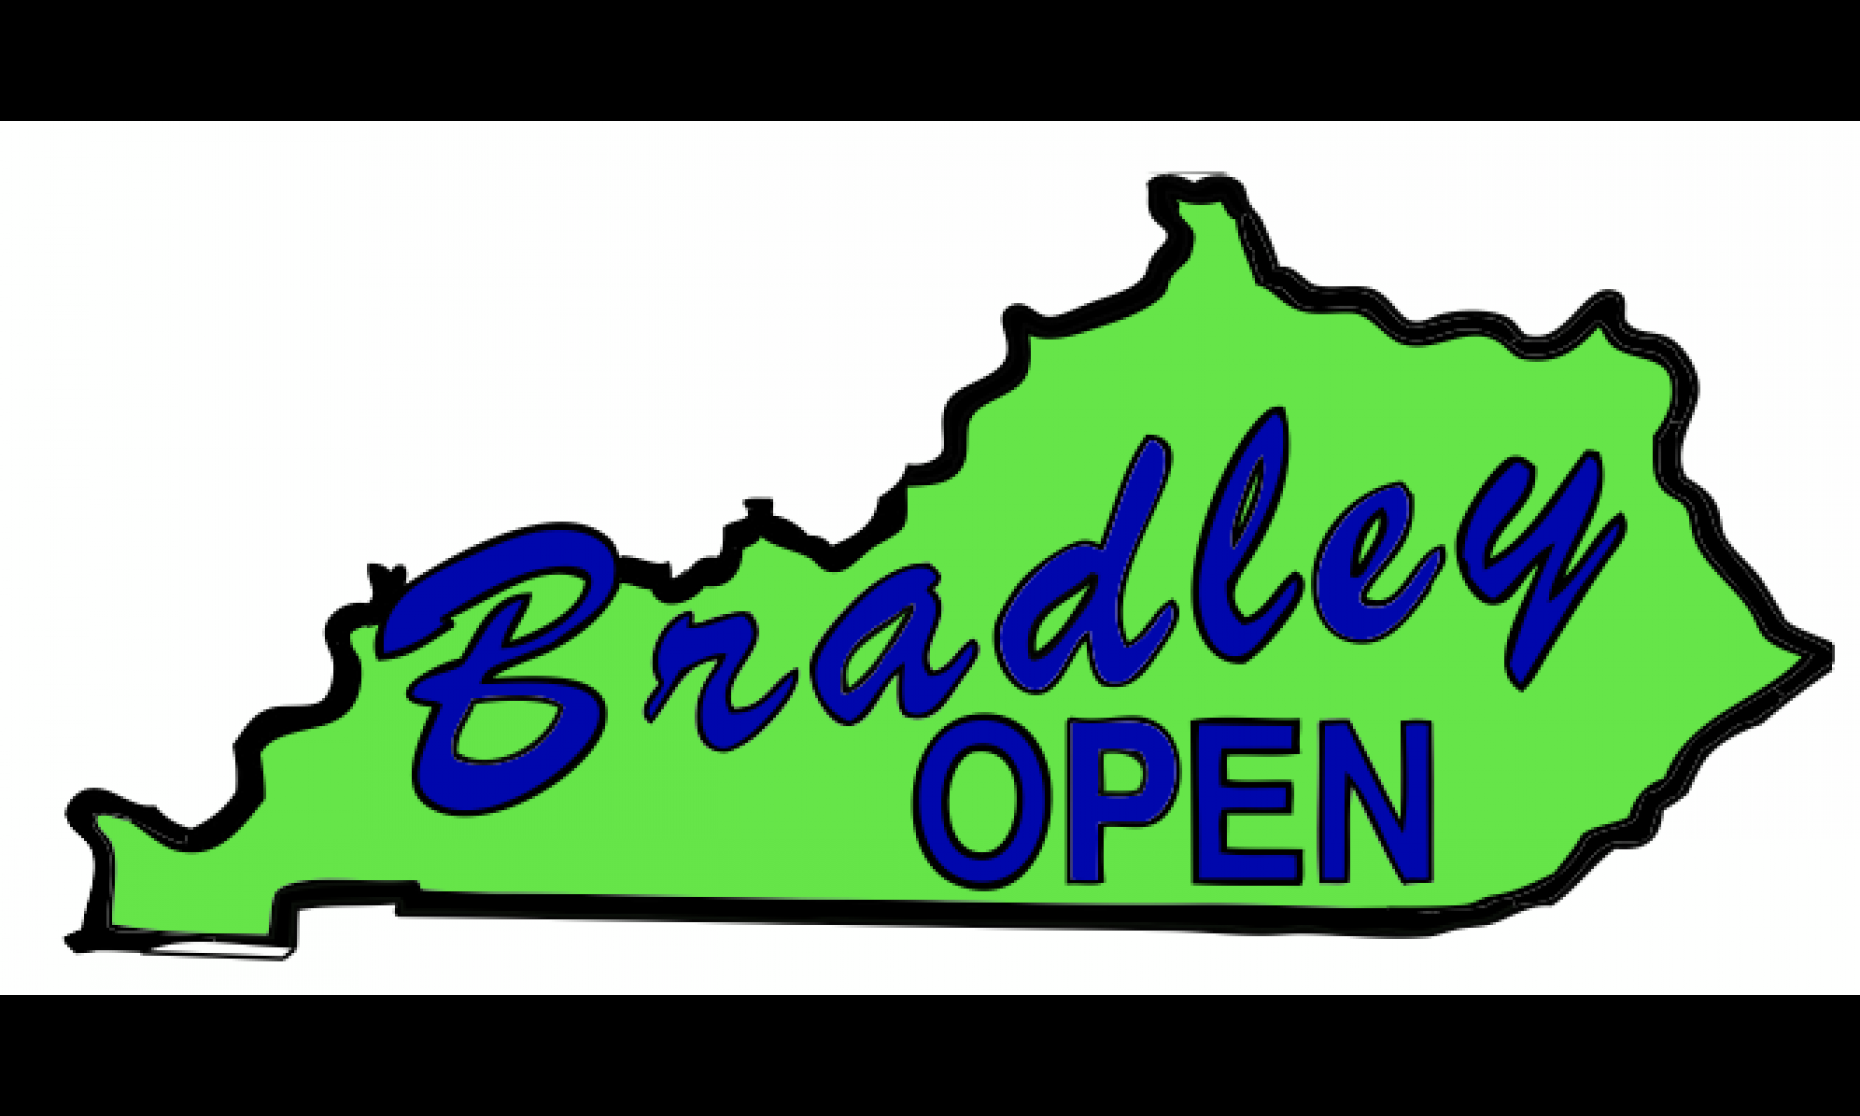 35th Annual Bradley Open Midwest Scratch Bowling Series